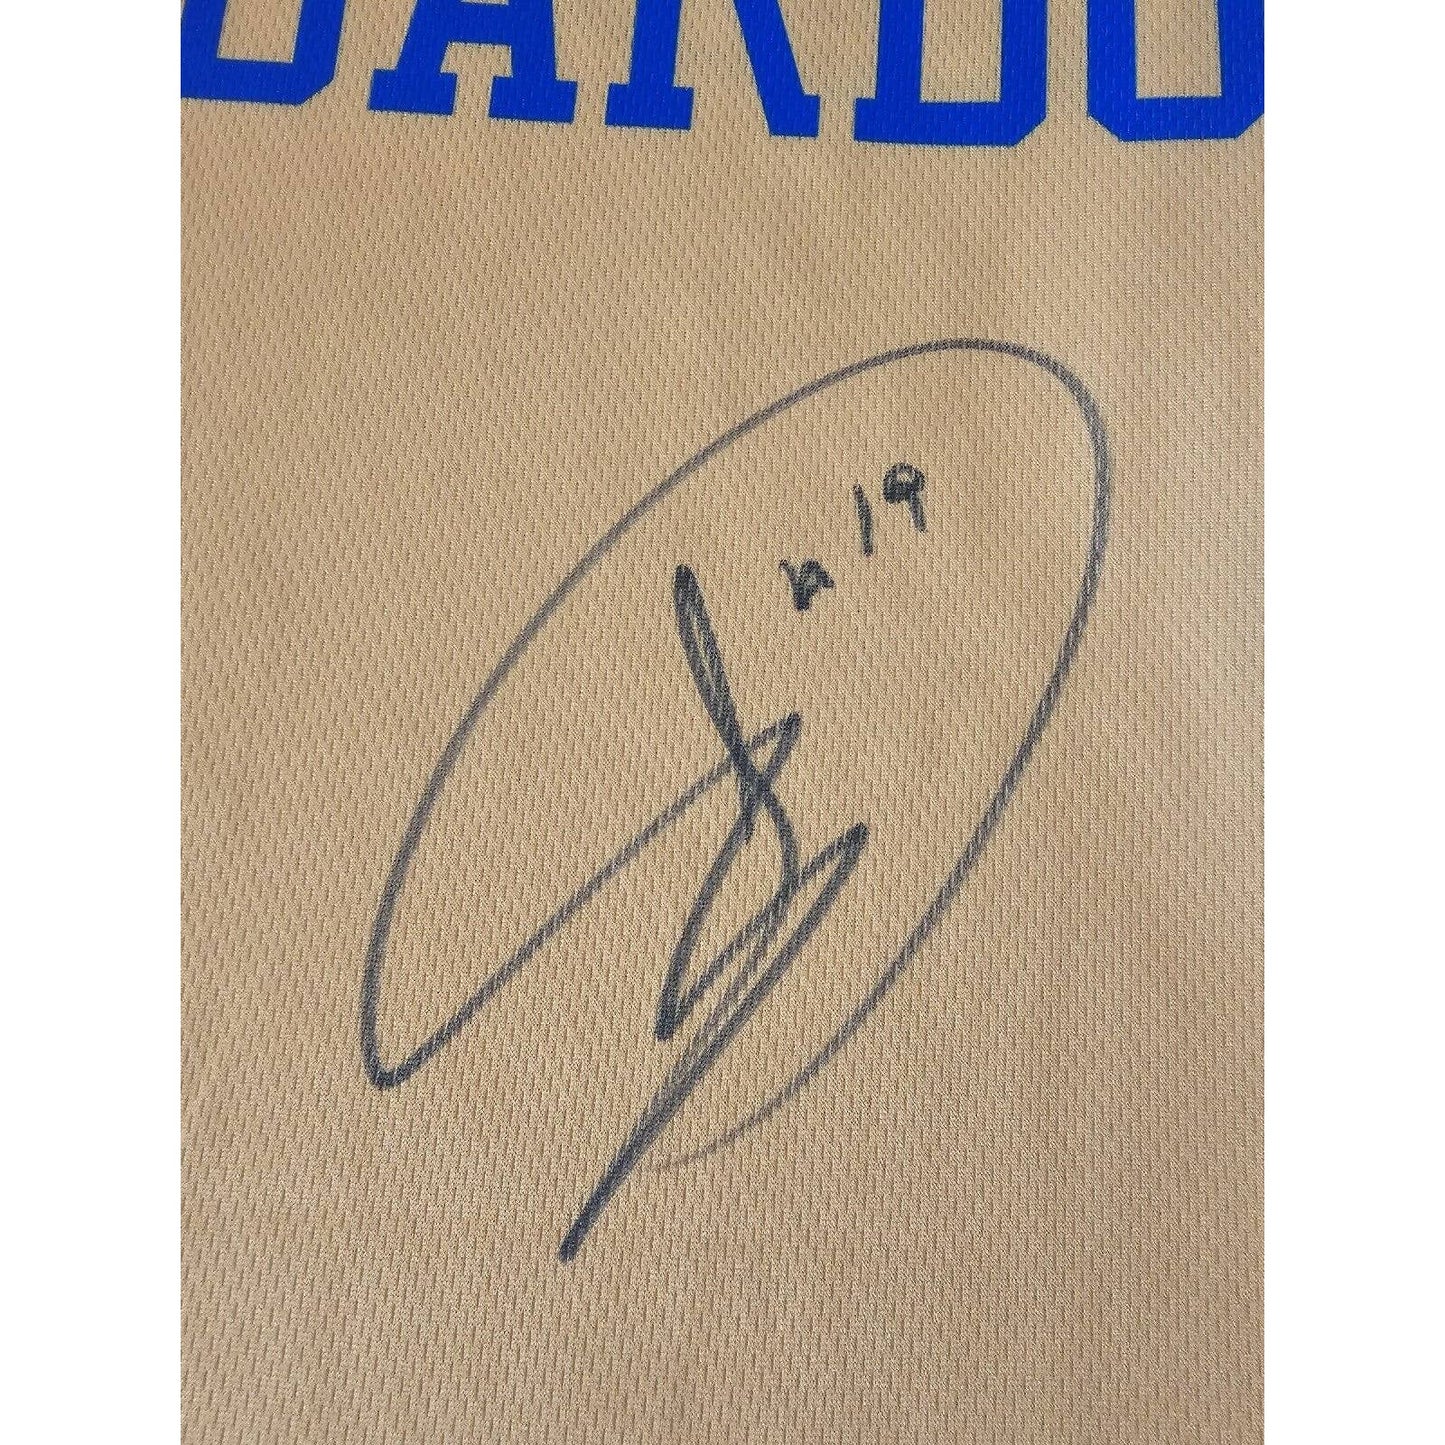 Leandro Barbosa Autographed/Signed Jersey Golden State Warriors